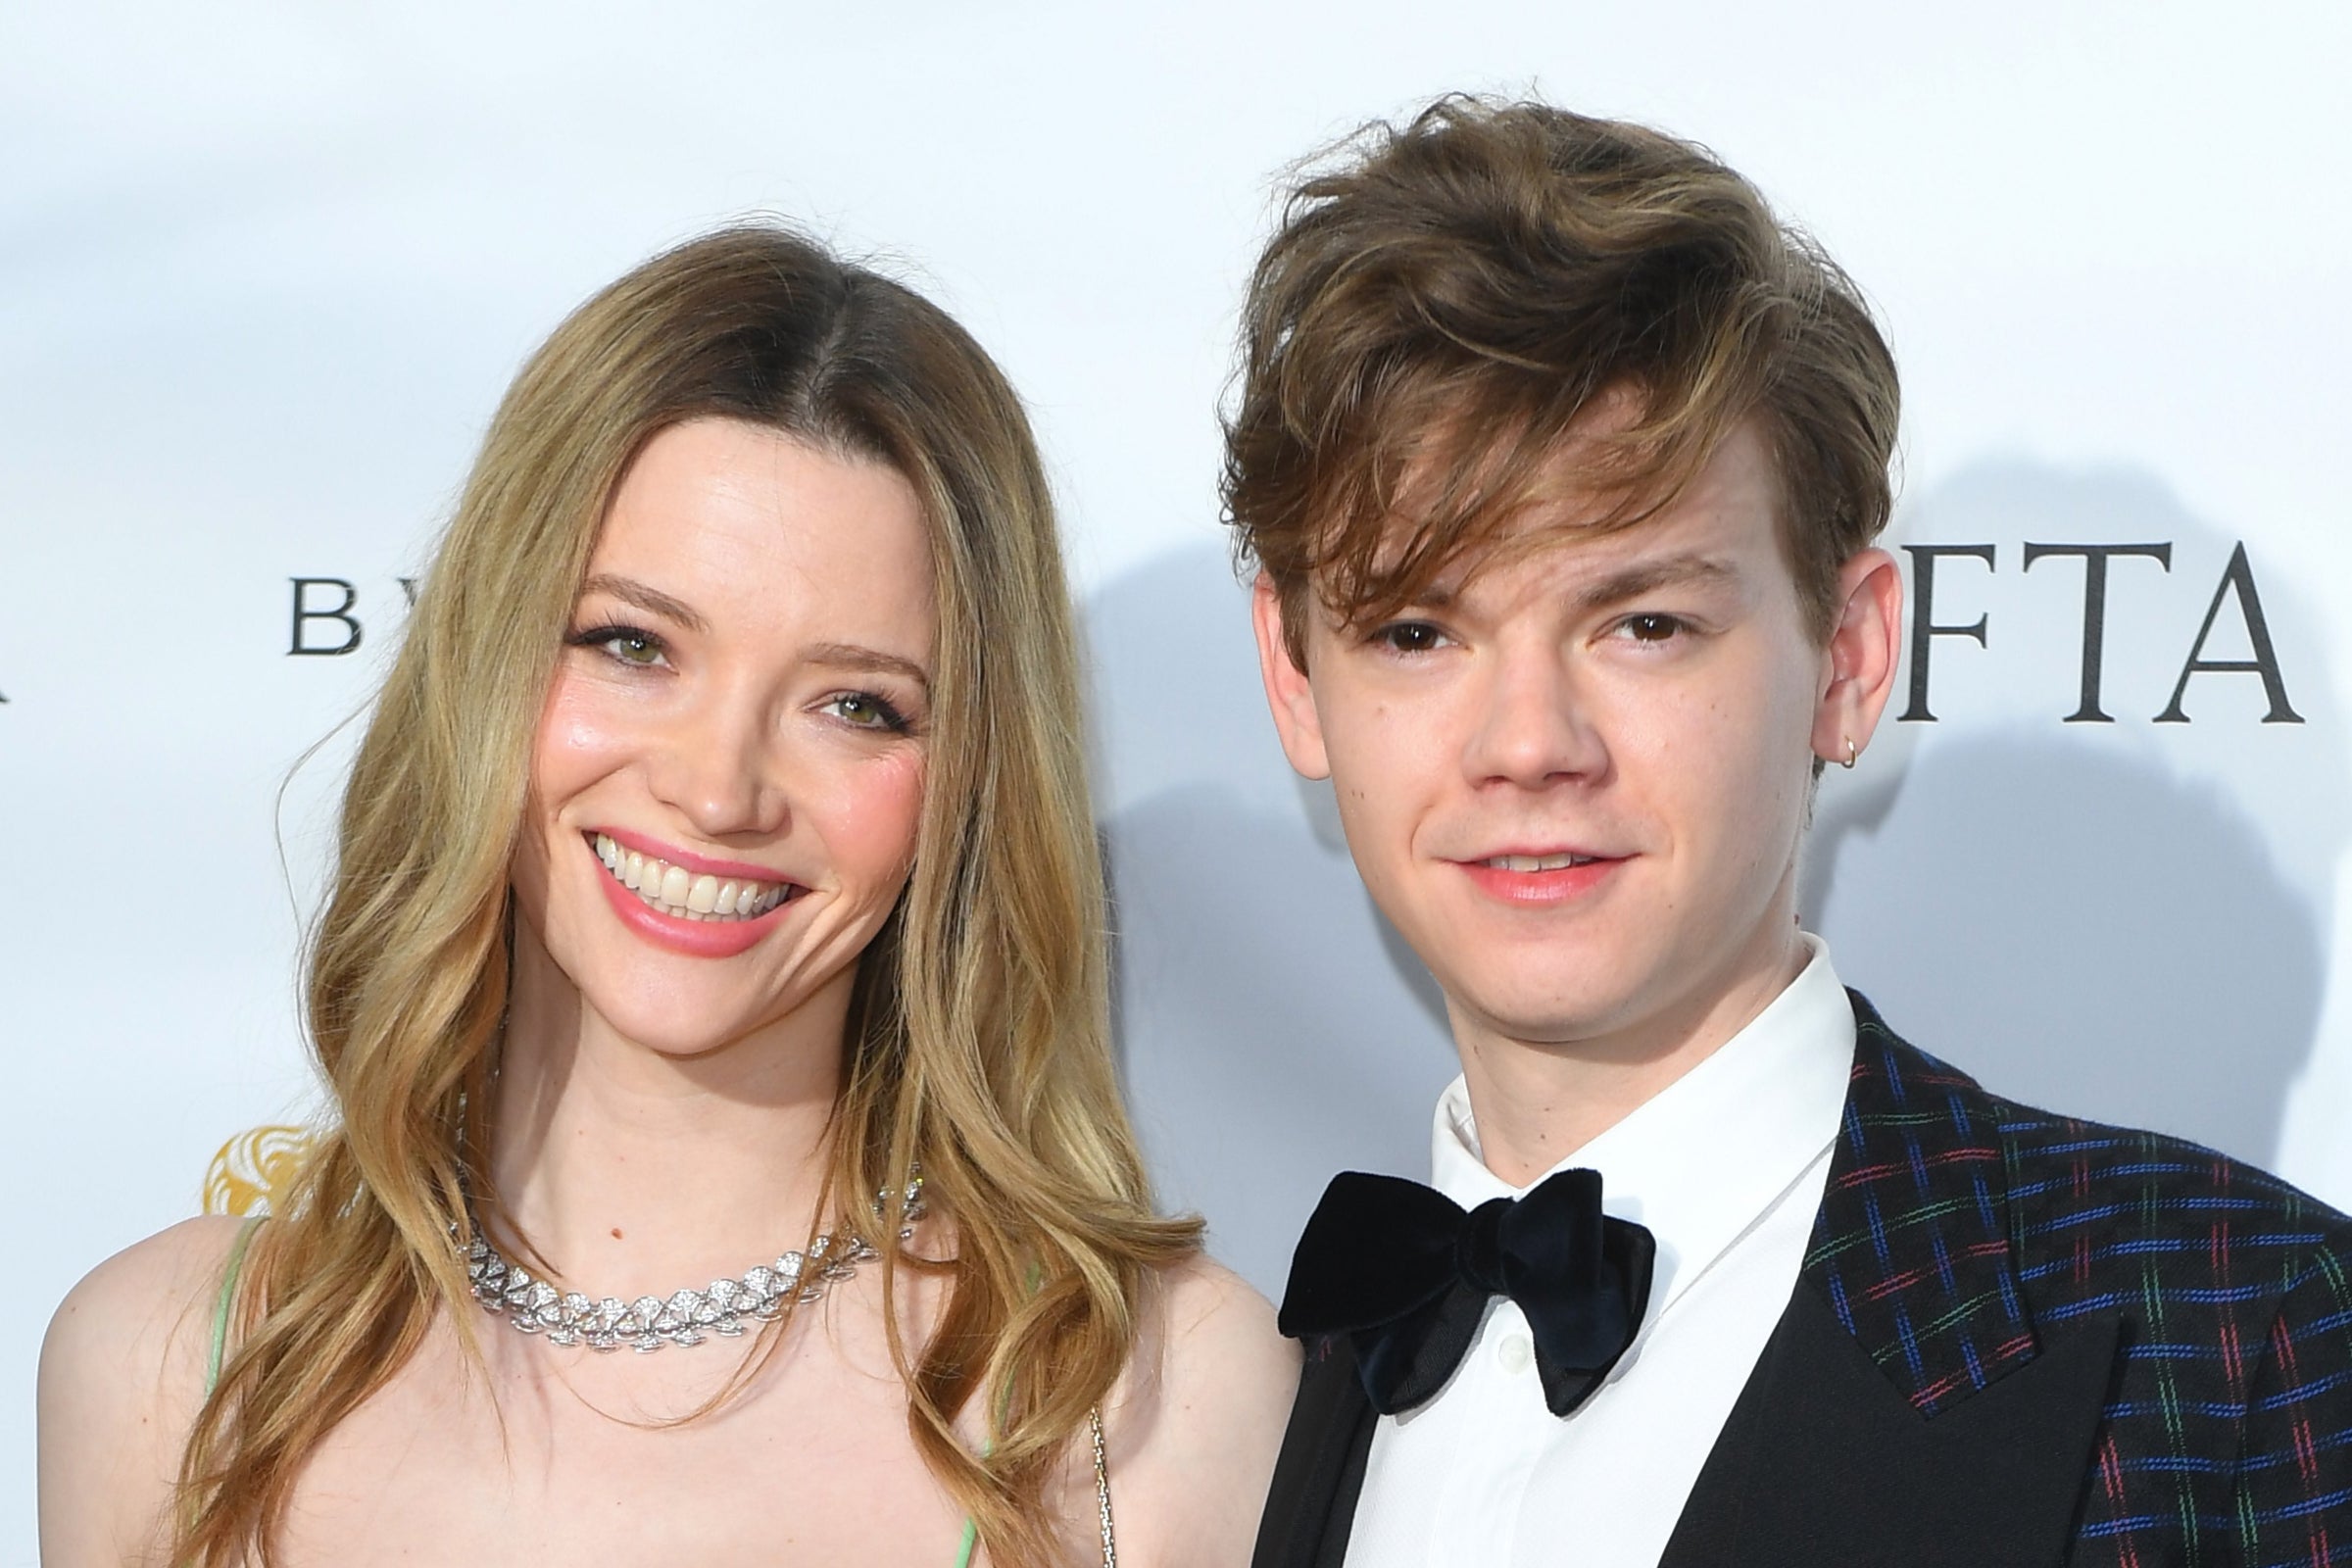 Brodie-Sangster and Riley met on the set of the Sex Pistols drama 'Pistol'